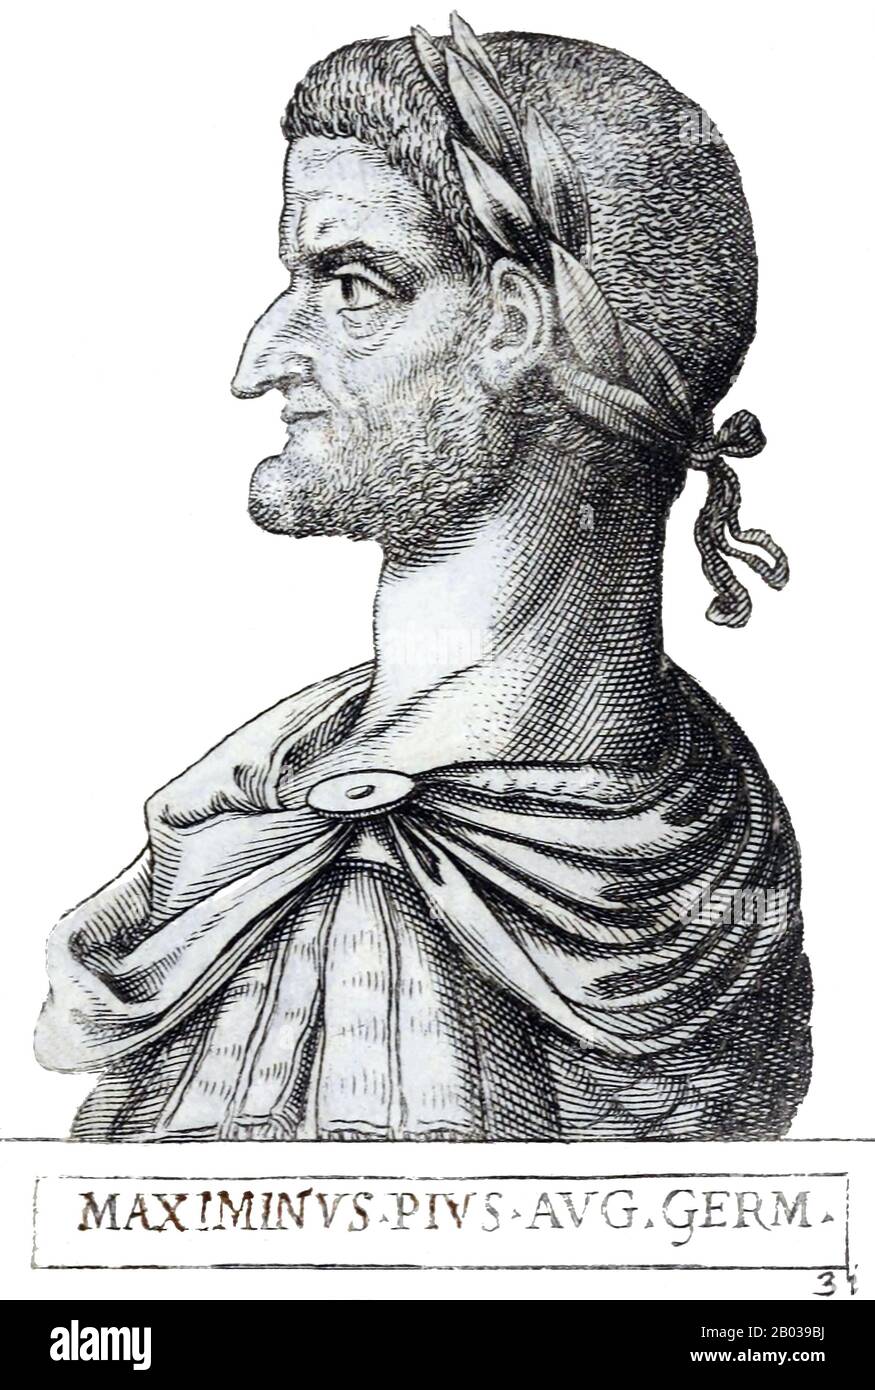 Of Thraco-Roman origin, Maximinus Thrax (173 - 238 CE) was a child of low birth, and was seen by the Senate as a barbarian and not a true Roman, despite Caracalla's Antonine Constitution granting citizenship to all freeborn citizens of the Empire. A career soldier, Maximinus rose through the ranks until he commanded a legion himself. He was one of the soldiers who were angered by Emperor Severus Alexander's payments to the Germanic tribes for peace, and plotted with them to assasinate the emperor in 235 CE.  The Praetorian Guard declared Maximinus emperor after the act, a choice that was only Stock Photo